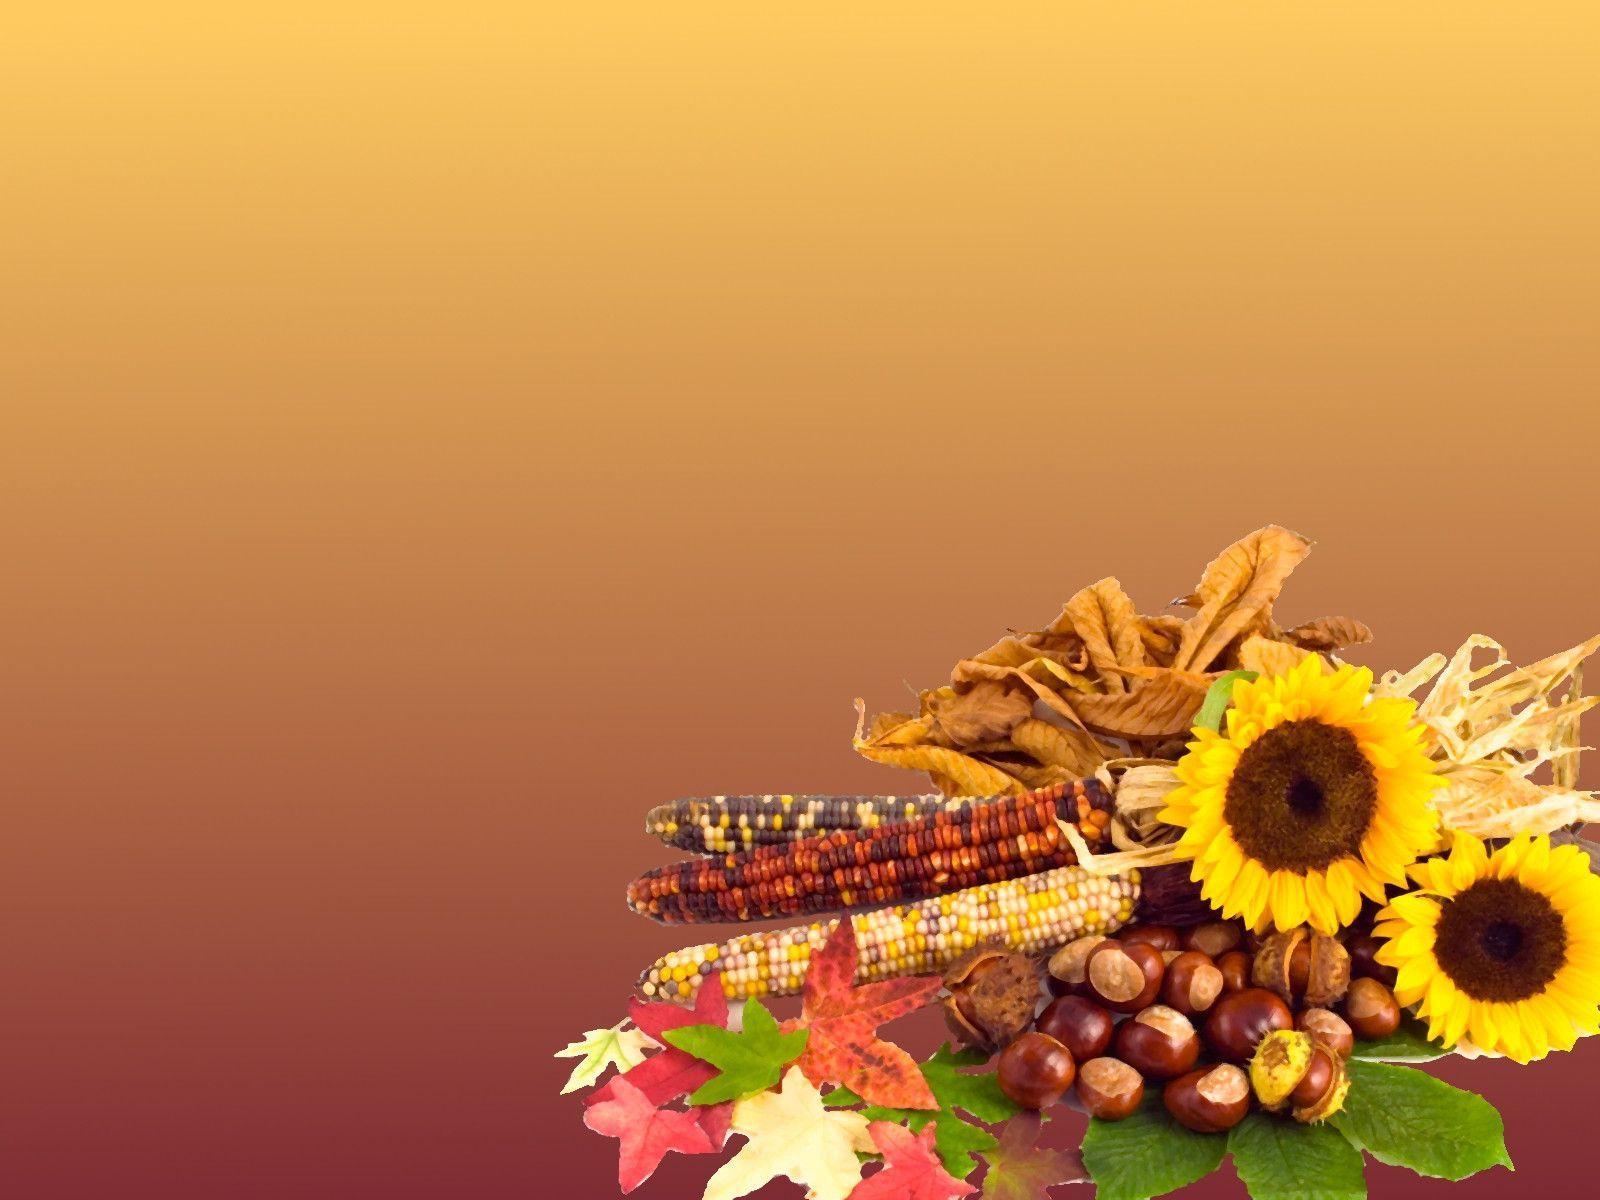 Thanksgiving Service Background. Free Internet Picture